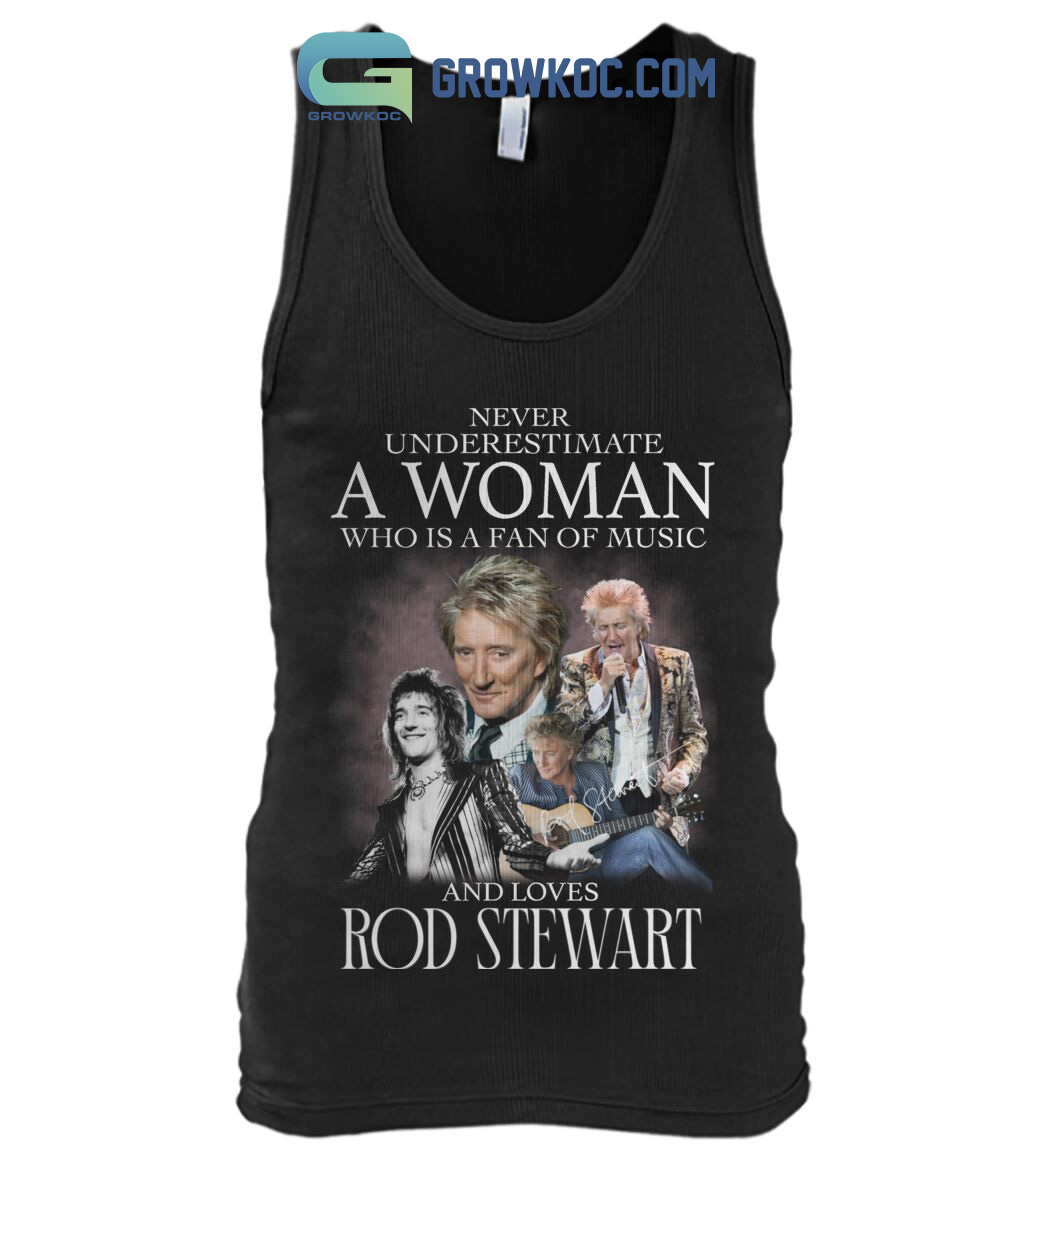 Never Underestimate A Woman Who Is A Fan Of Music And Loves Rod Stewart T Shirt